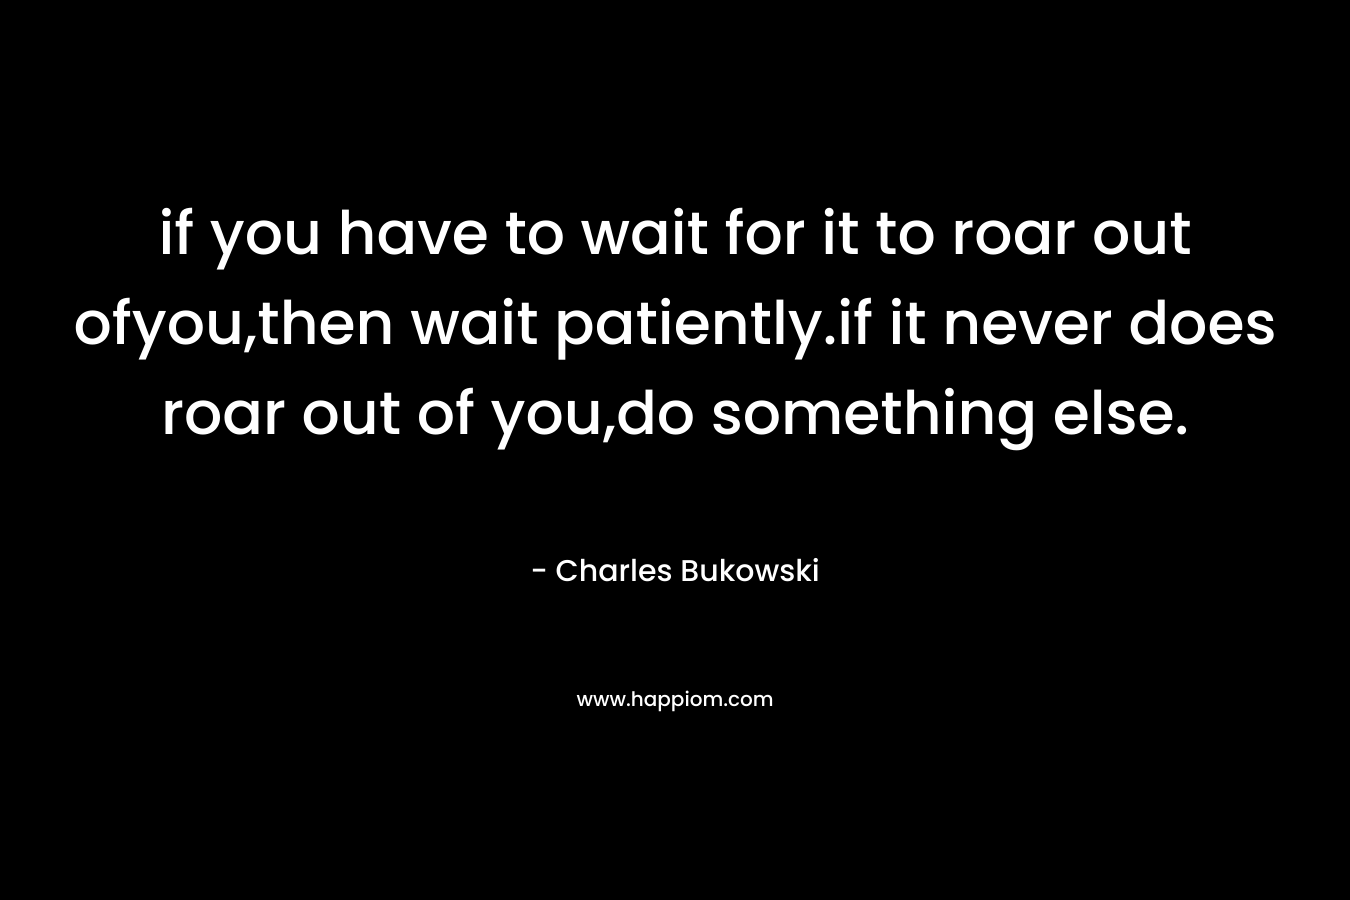 if you have to wait for it to roar out ofyou,then wait patiently.if it never does roar out of you,do something else.